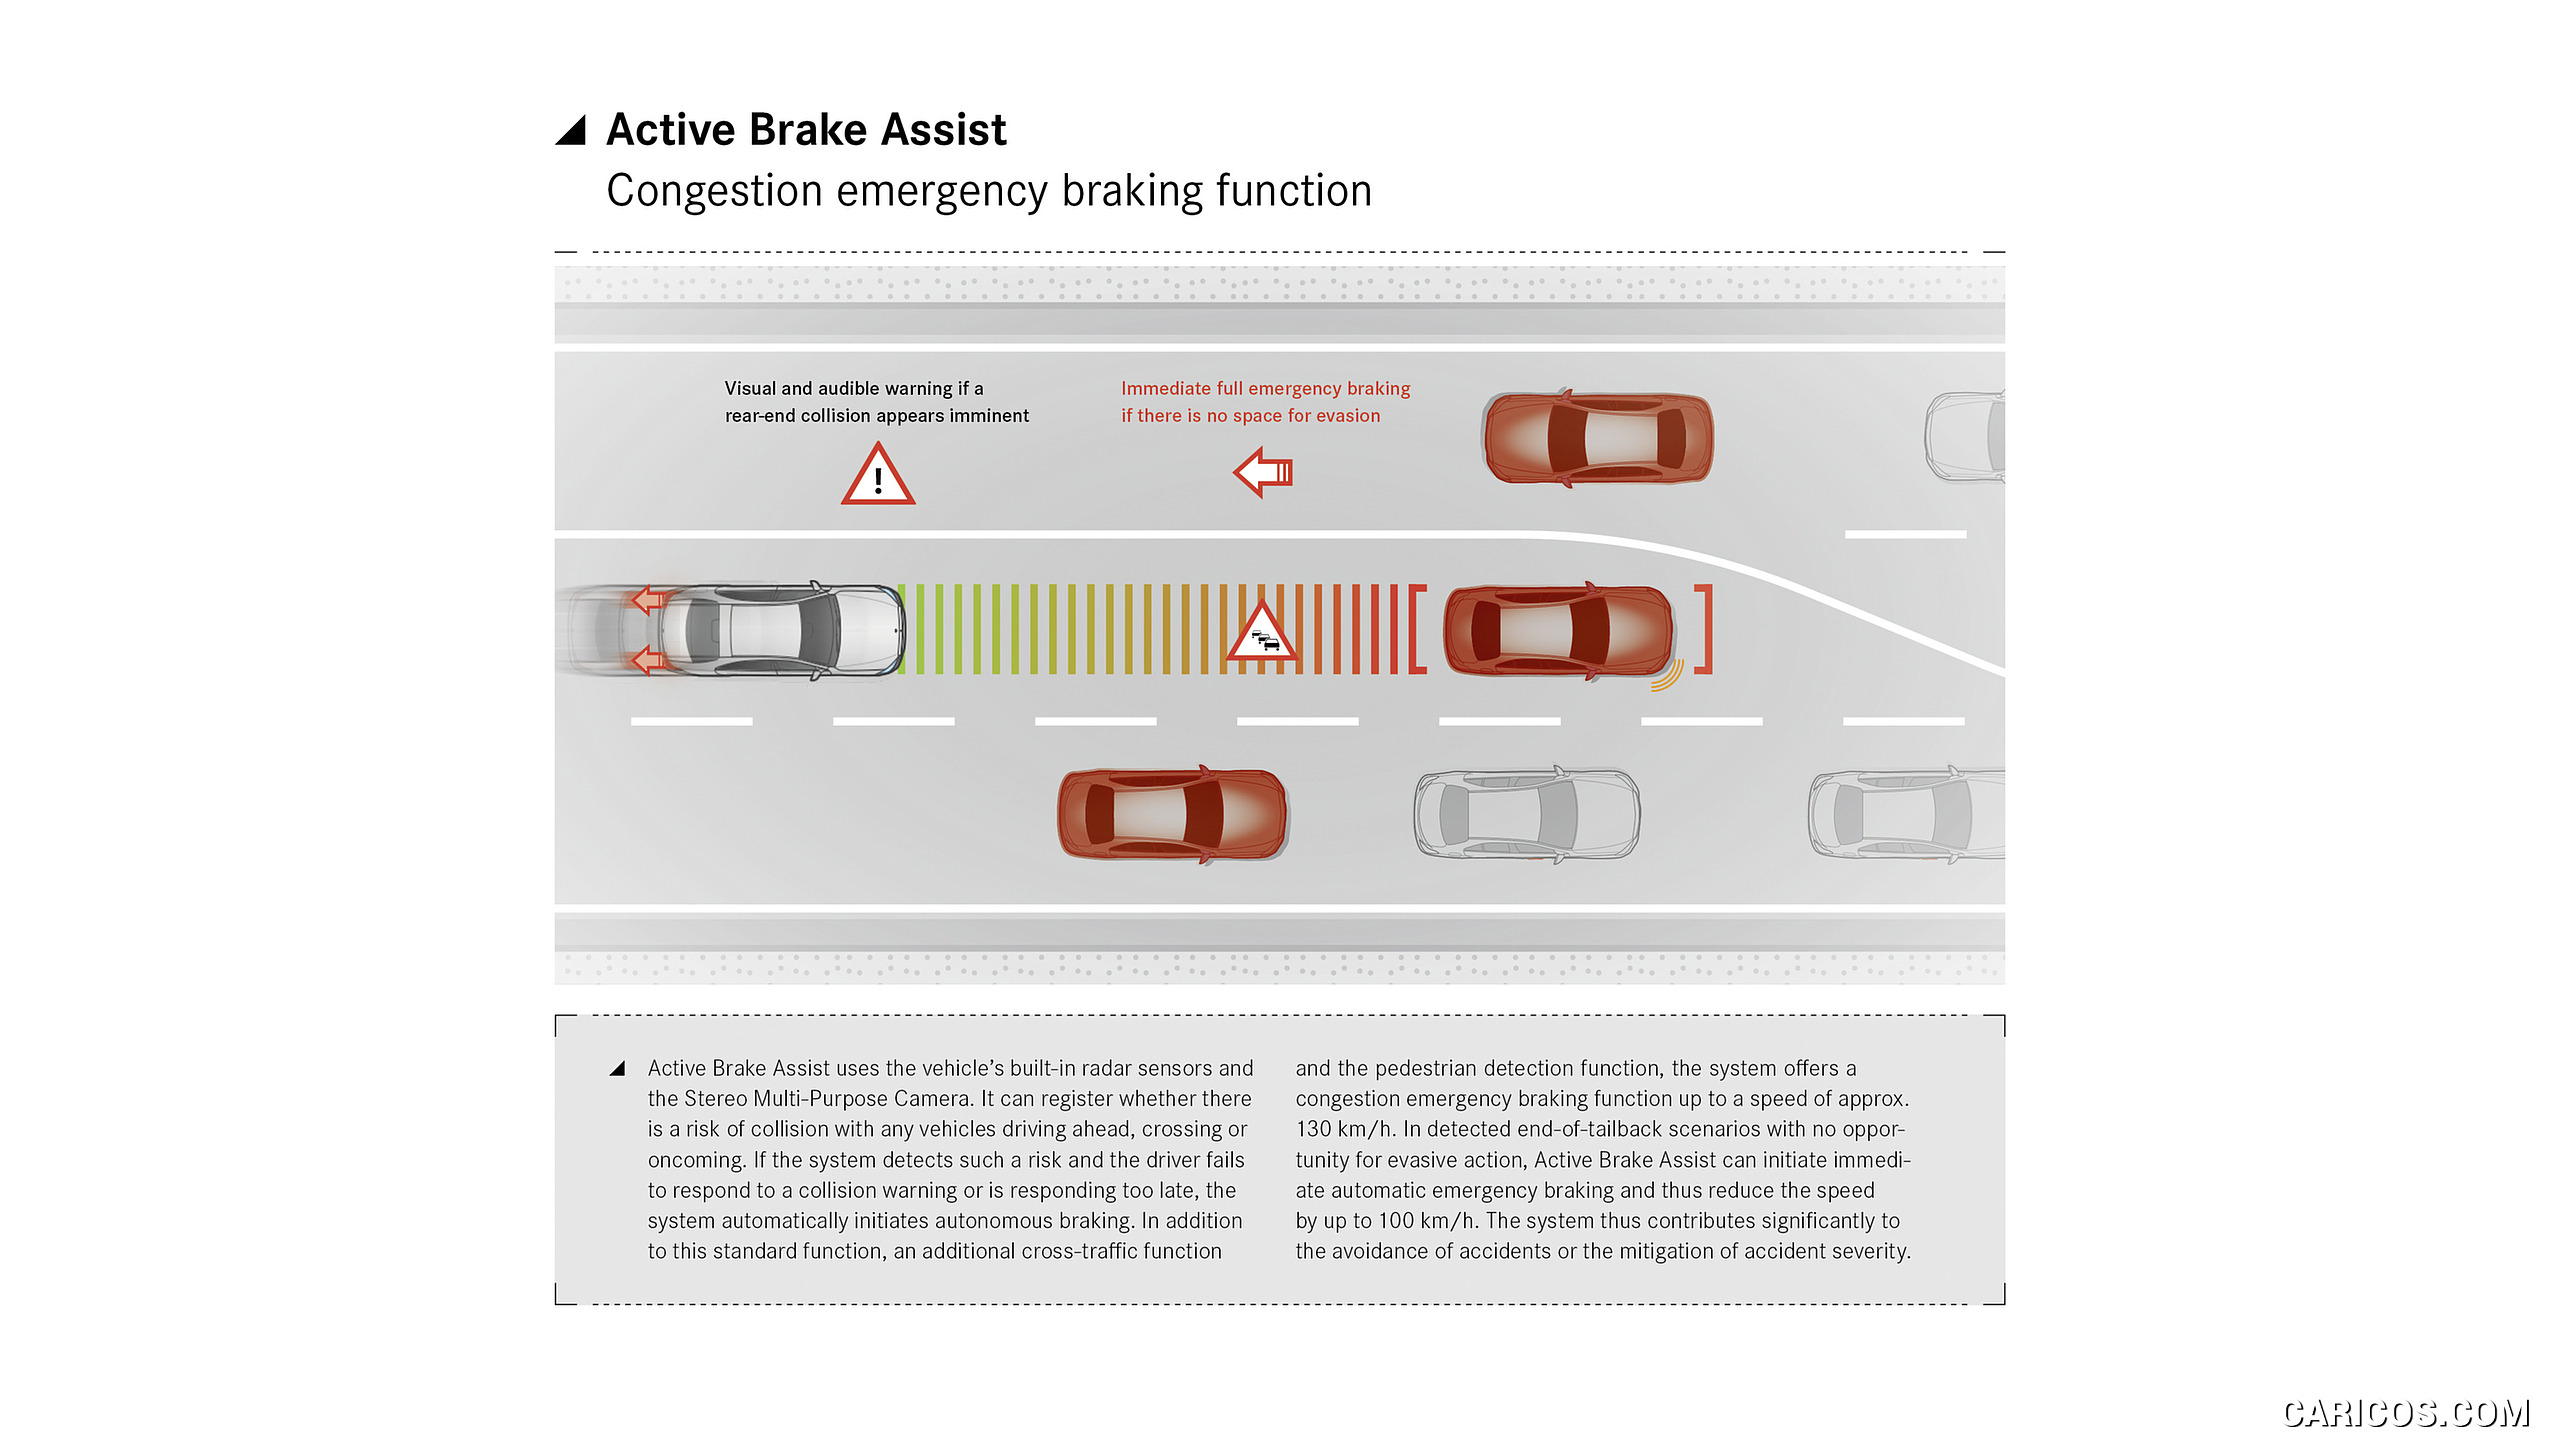 2021 Mercedes-Benz S-Class - Driving assistance system: Active Braking Assist with congestion emergency braking function, #201 of 316